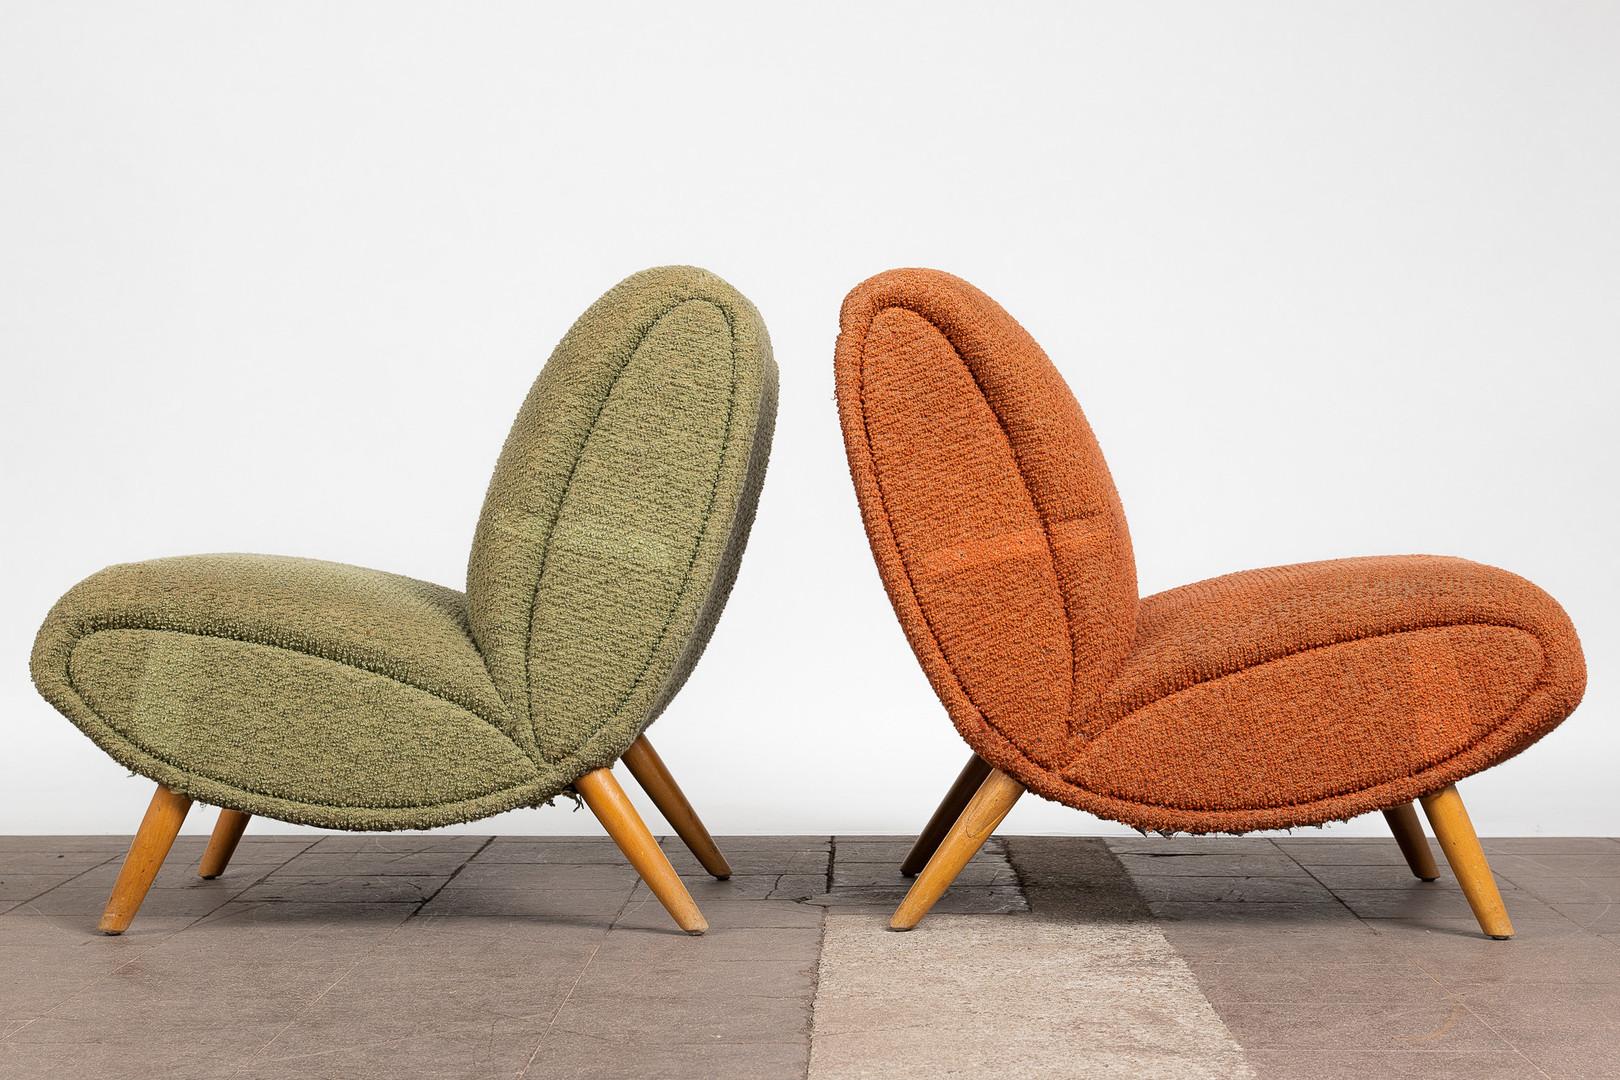 Fabric Pair of Lounge Chairs by Normann Bel Geddes, Mid-Century Modern, 1949, USA For Sale